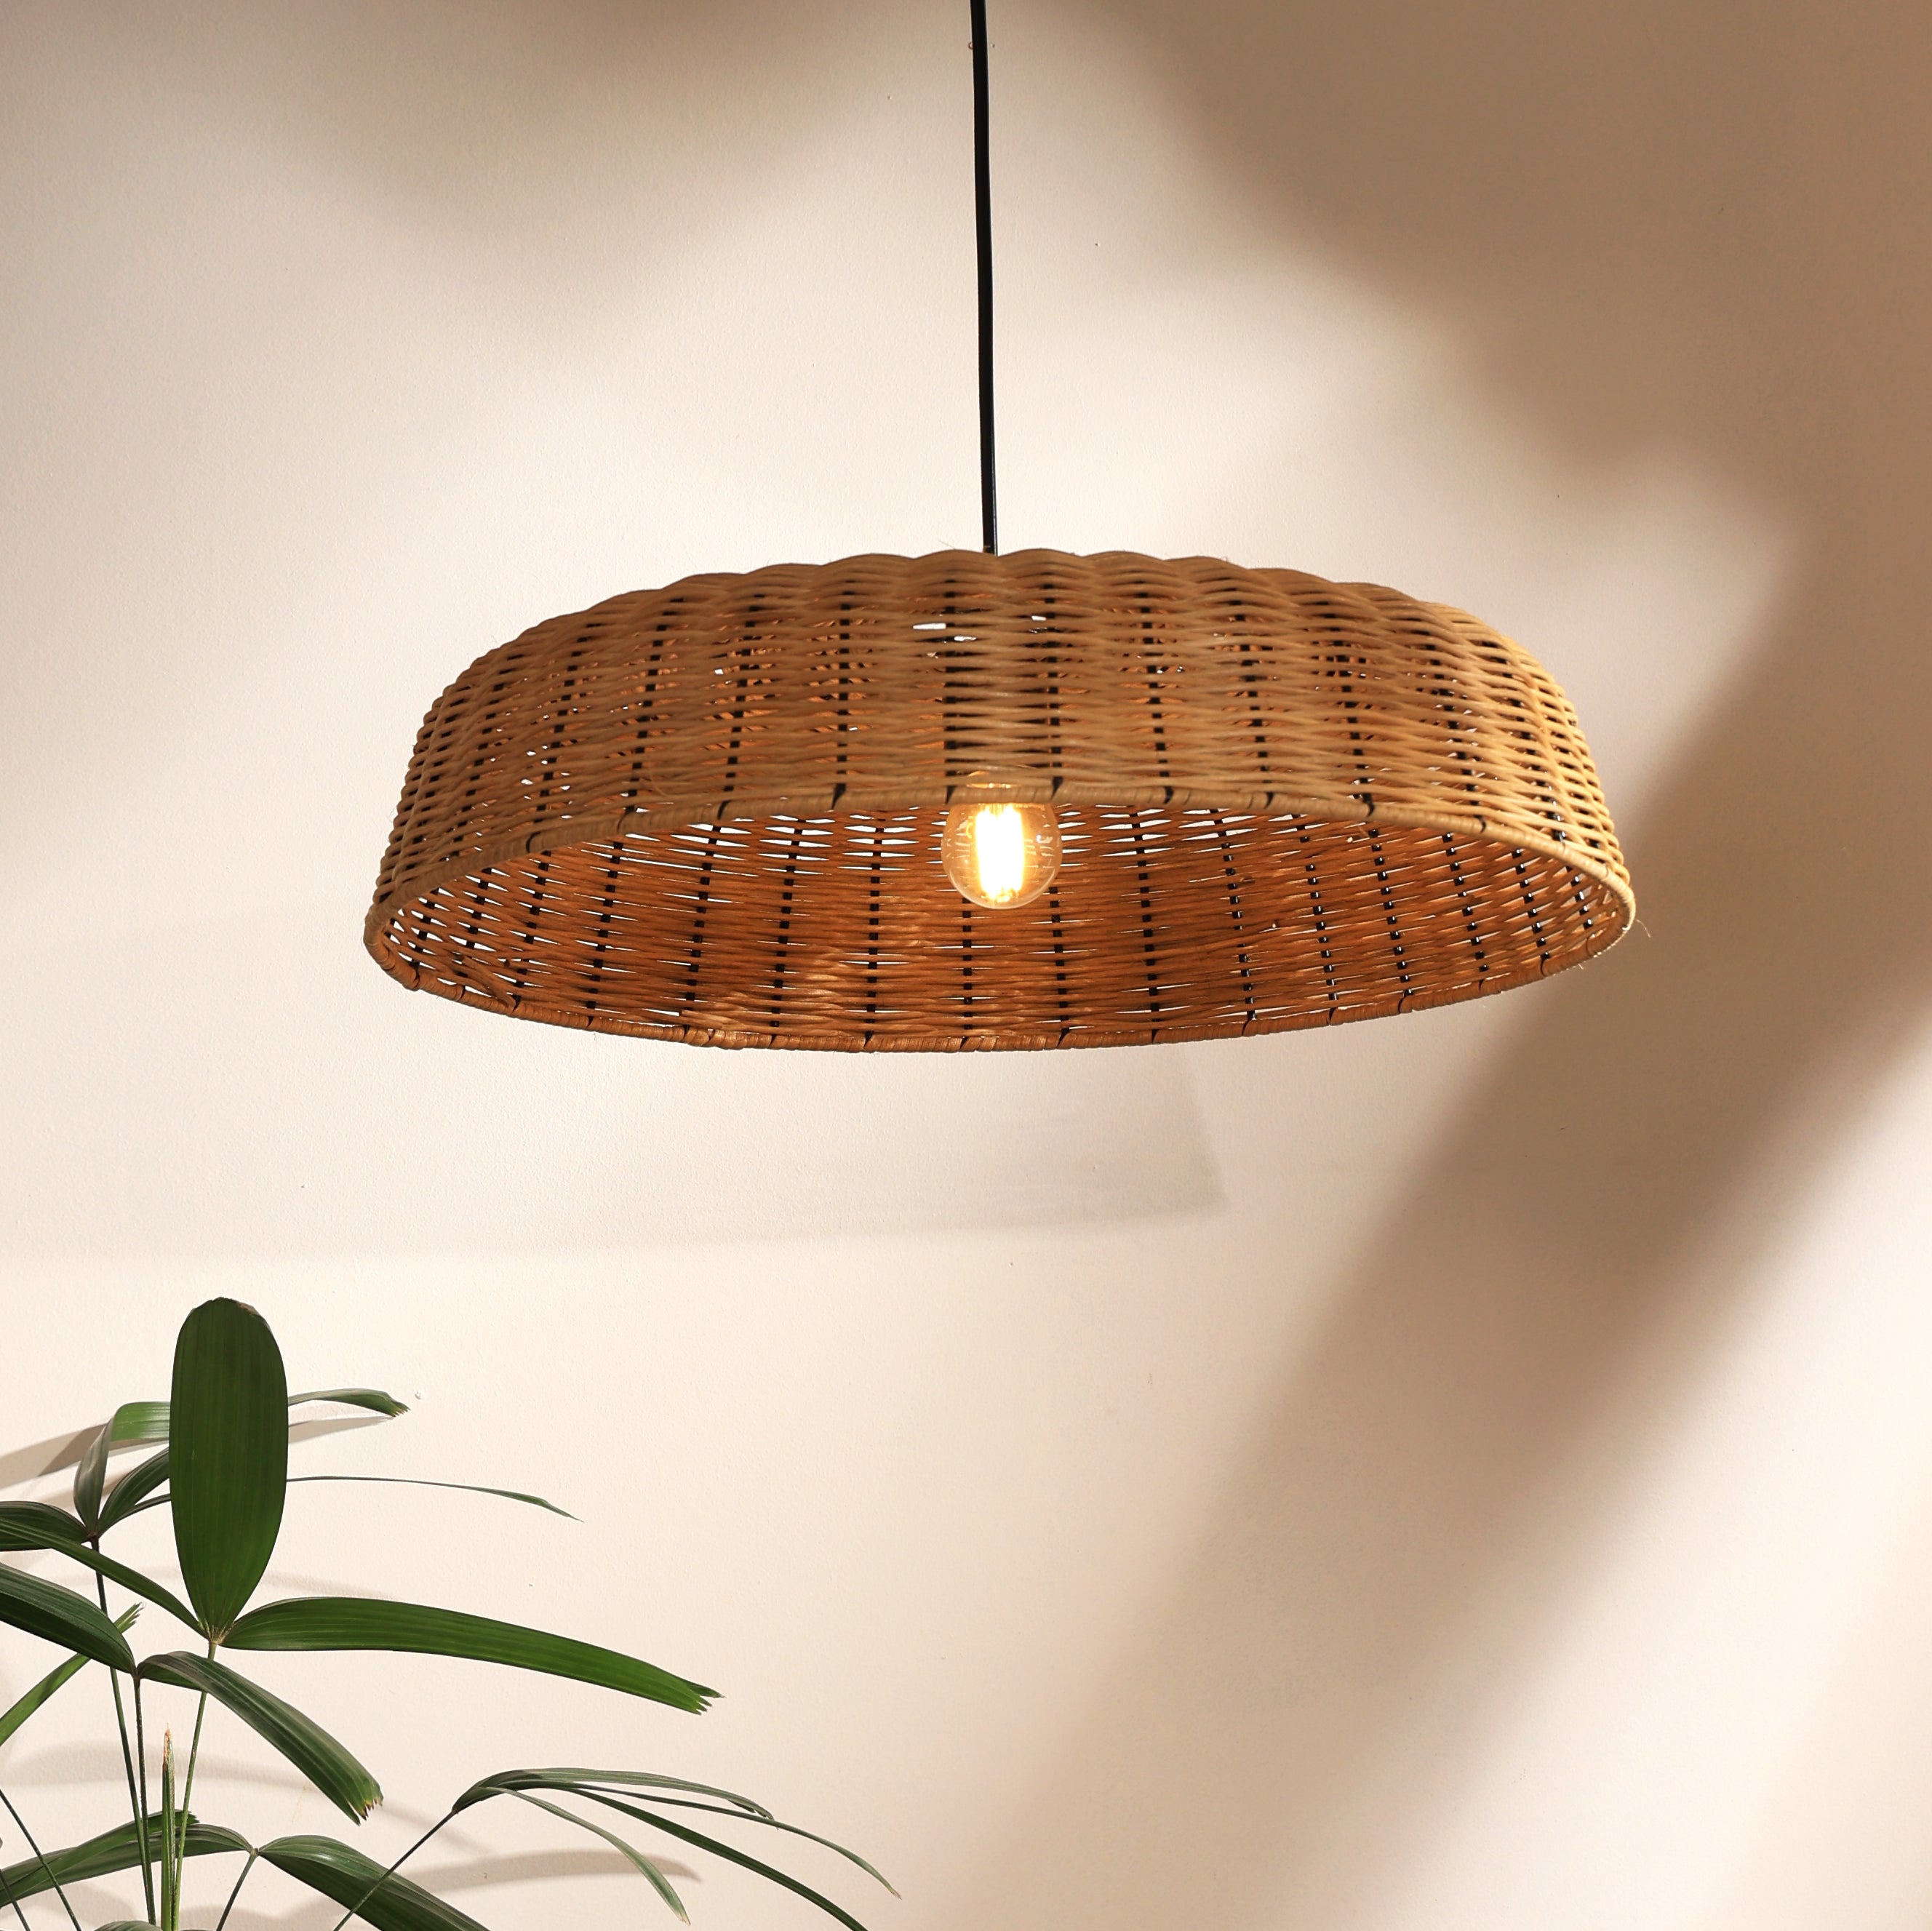 Natural Opulence - Natural Rattan and Cane, Hanging Lamp, Handmade in India